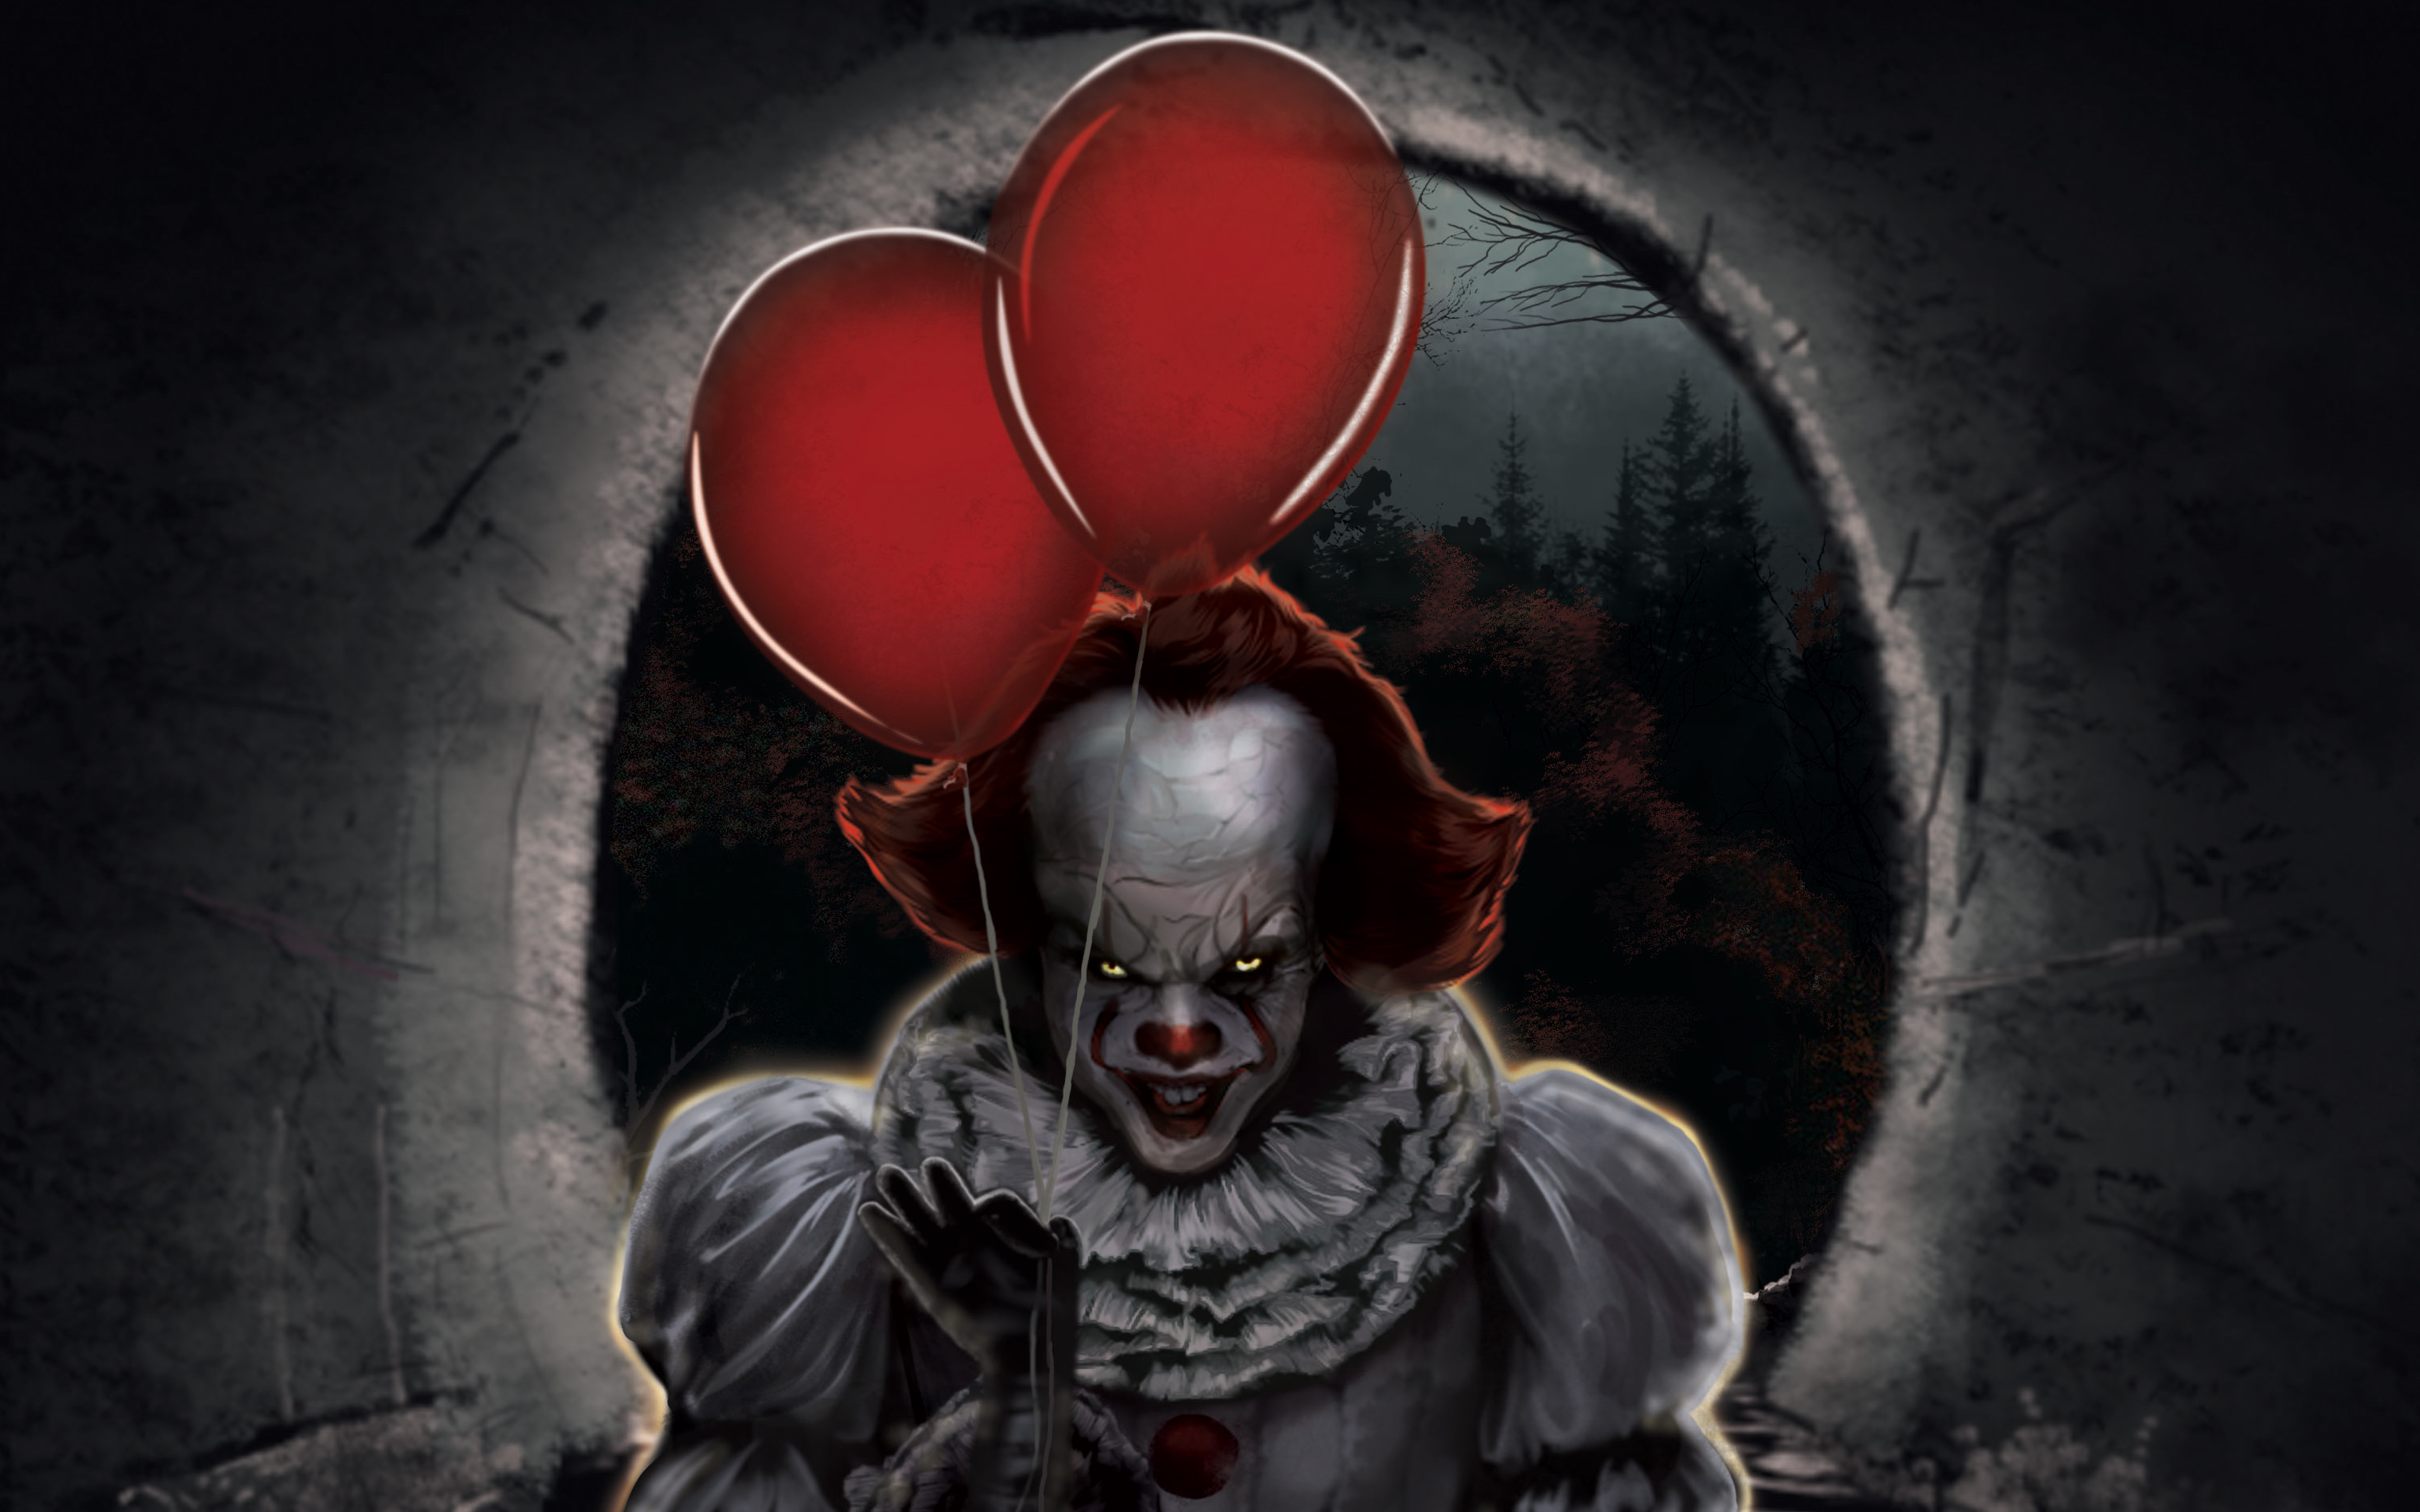 Pennywise with ballons fanart Wallpapers 4k Ultra HD ID:3958.